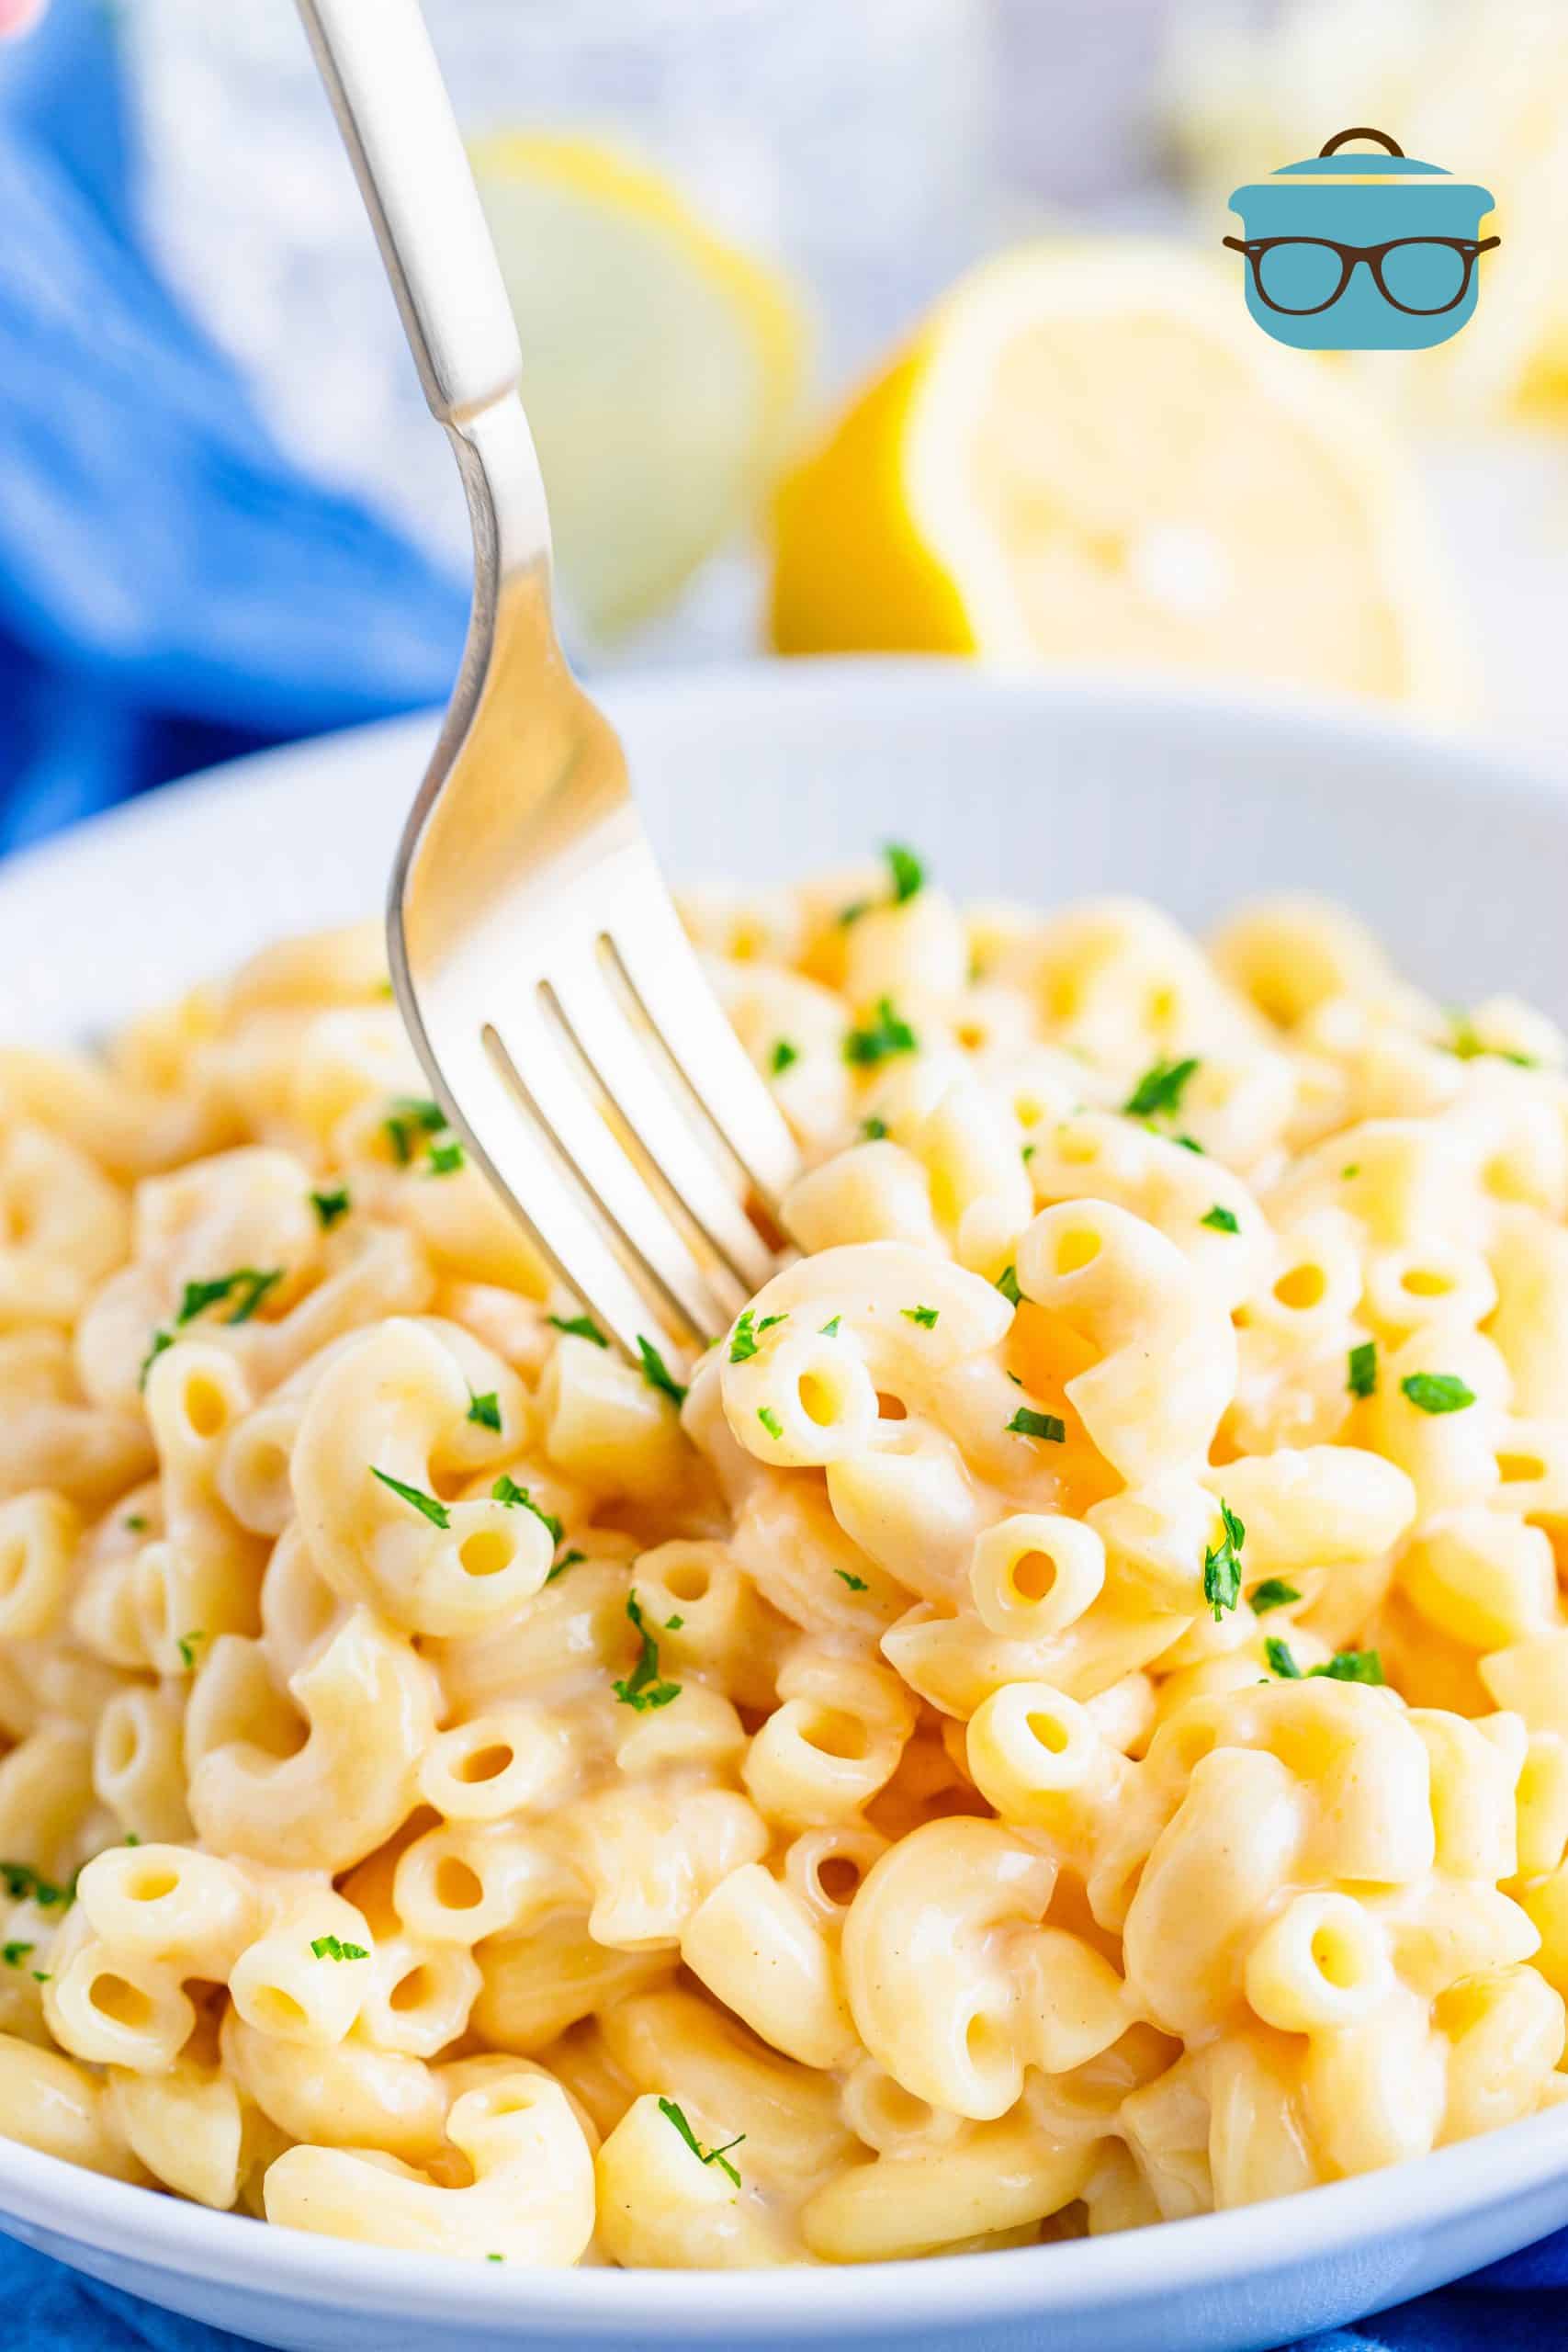 Instant Pot Macaroni and Cheese shown on a white plate with a fork.